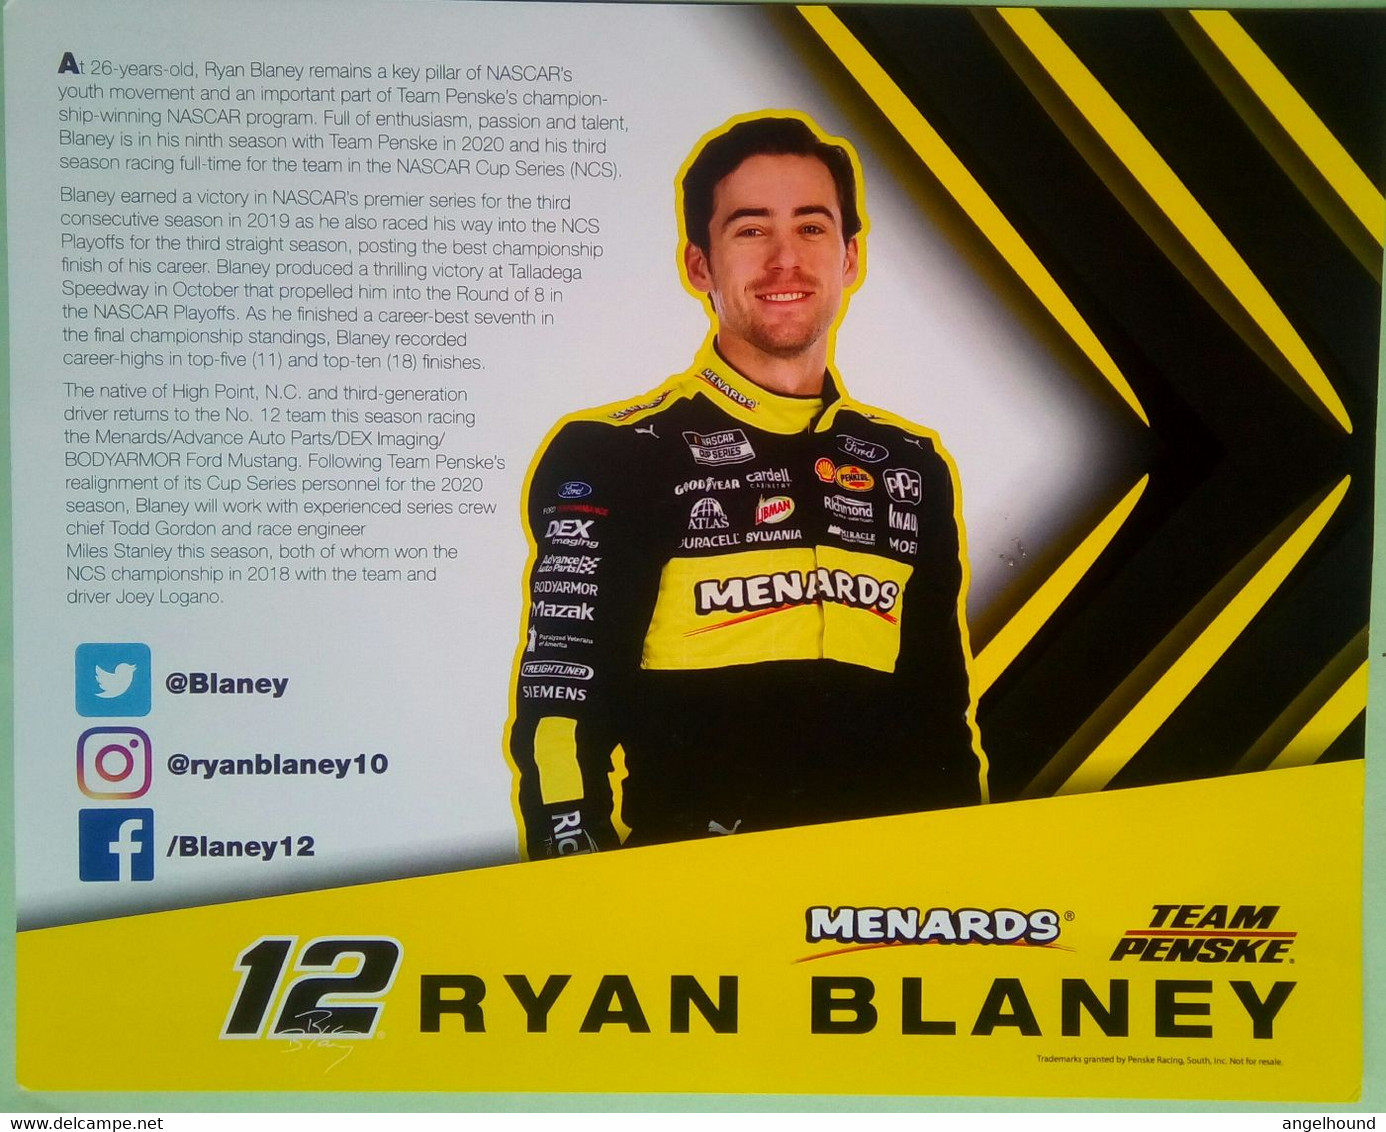 Ryan Blaney (American Race Car Driver) - Apparel, Souvenirs & Other